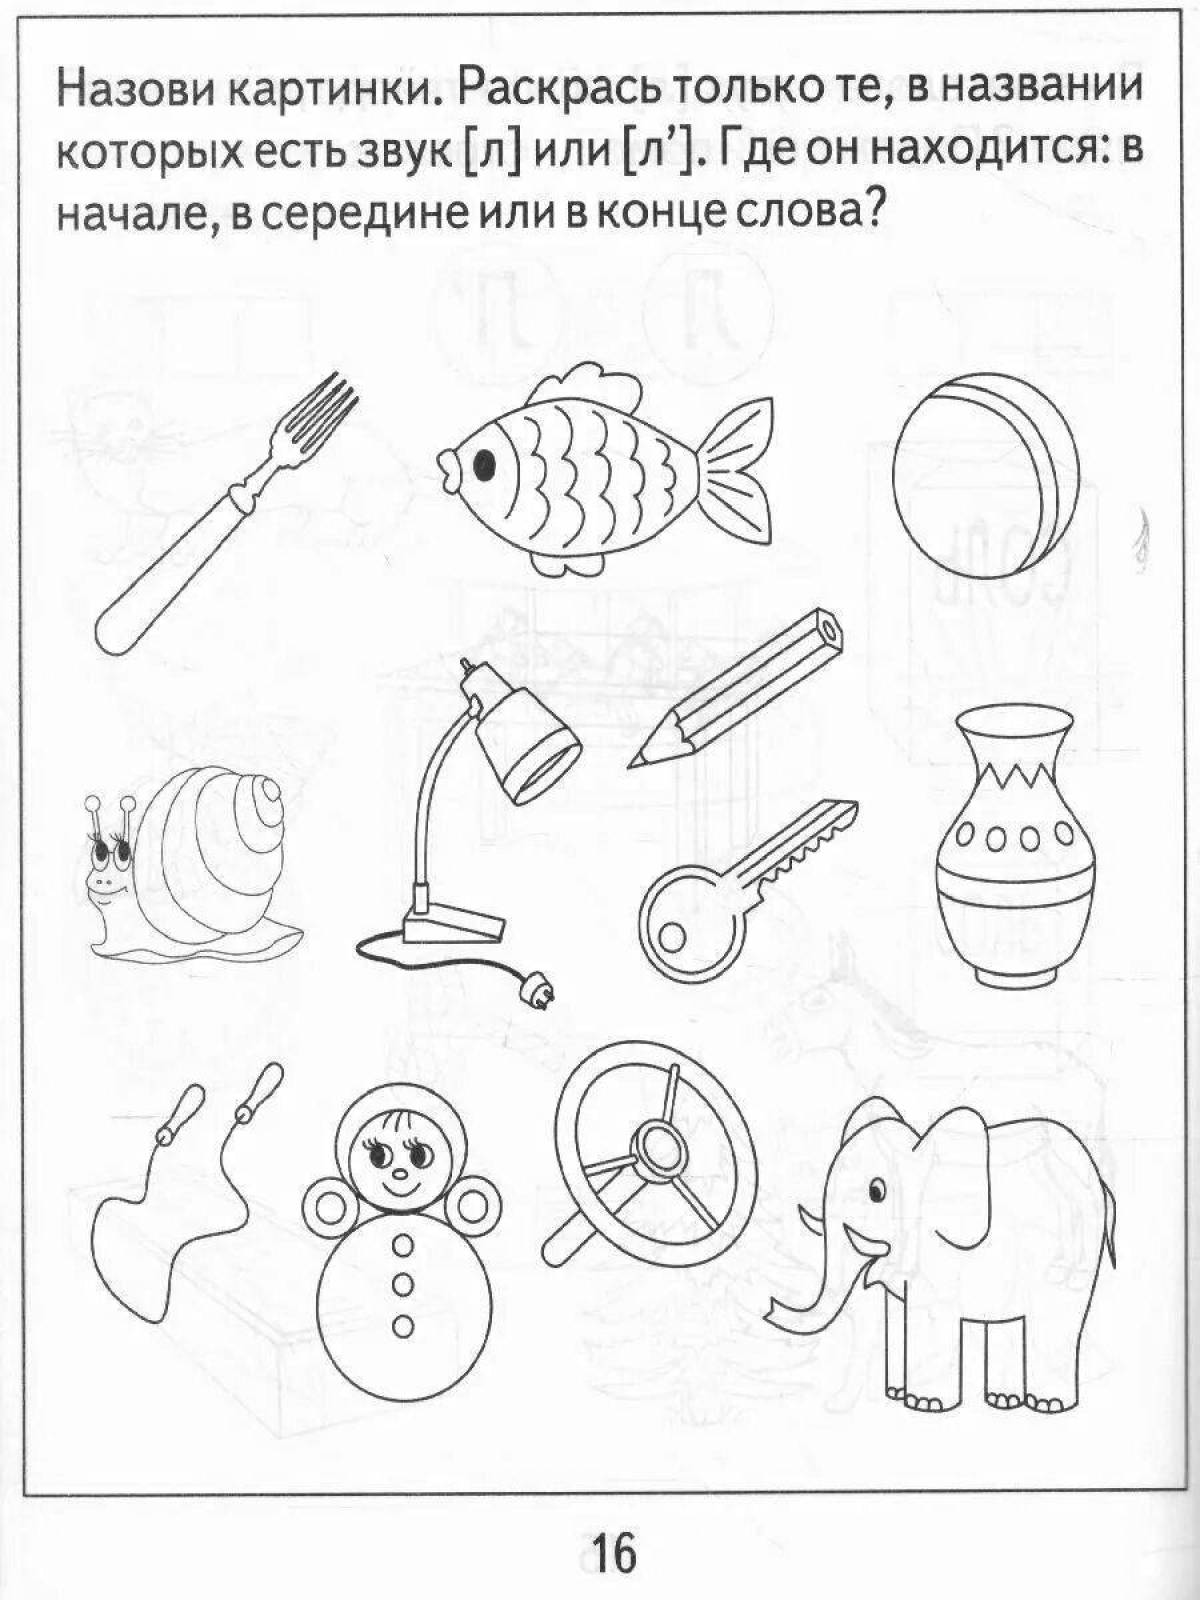 Charming r-driven coloring page for speech therapy